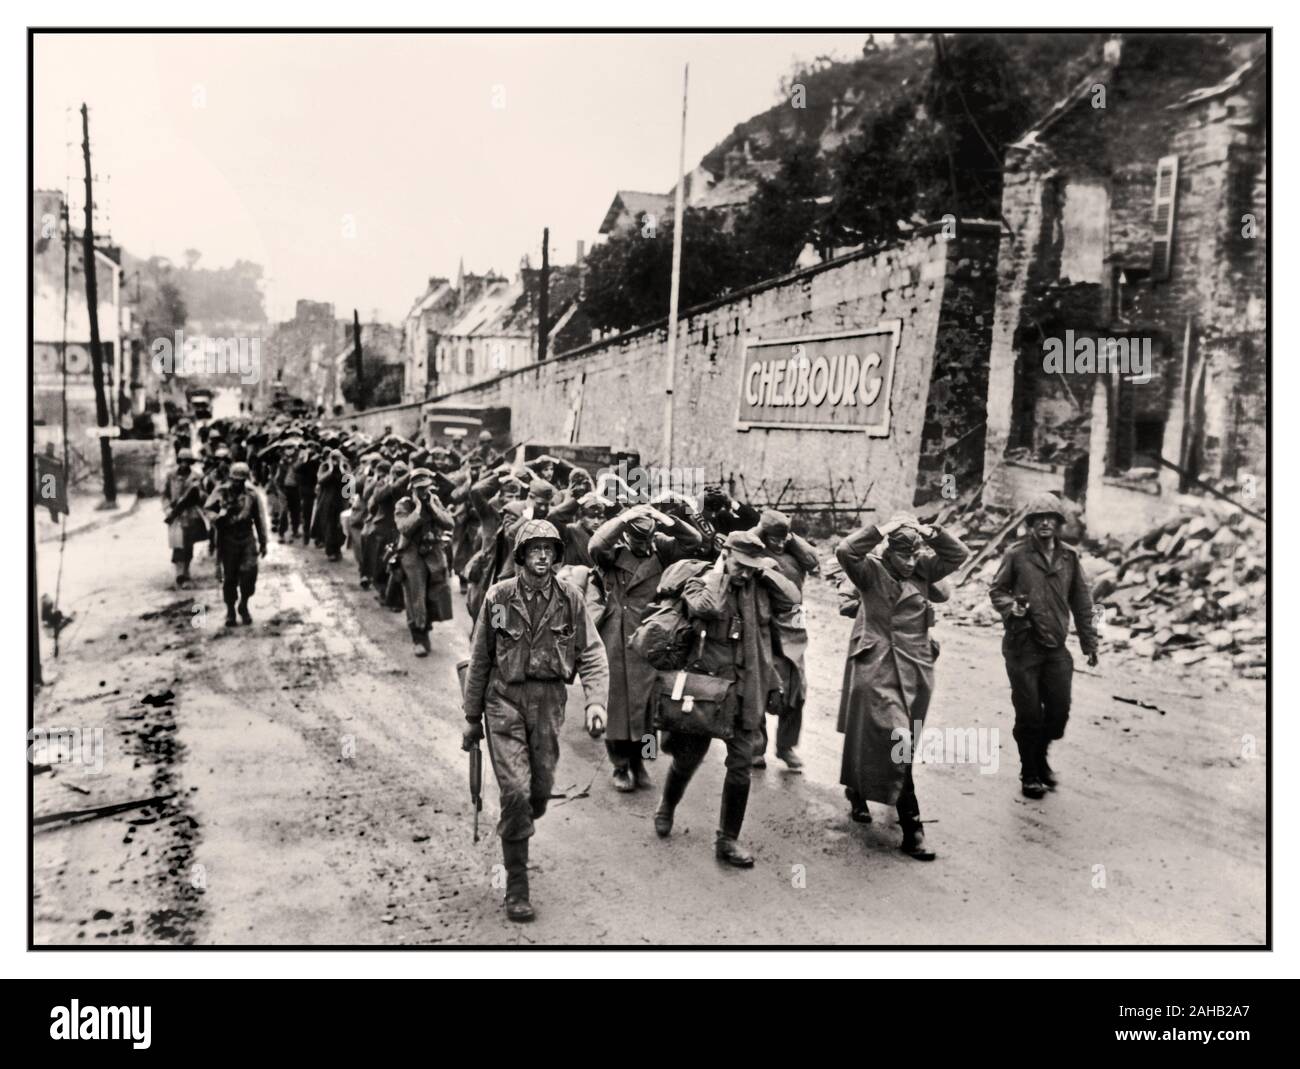 World War II June 1944  German Wehrmacht army prisoners captured and surrendered soldiers with hands on heads after operation overlord D-Day offensive marching with American allied troops through a street in Cherbourg, France, WW2 Second World War France German Surrender Hands on heads Stock Photo